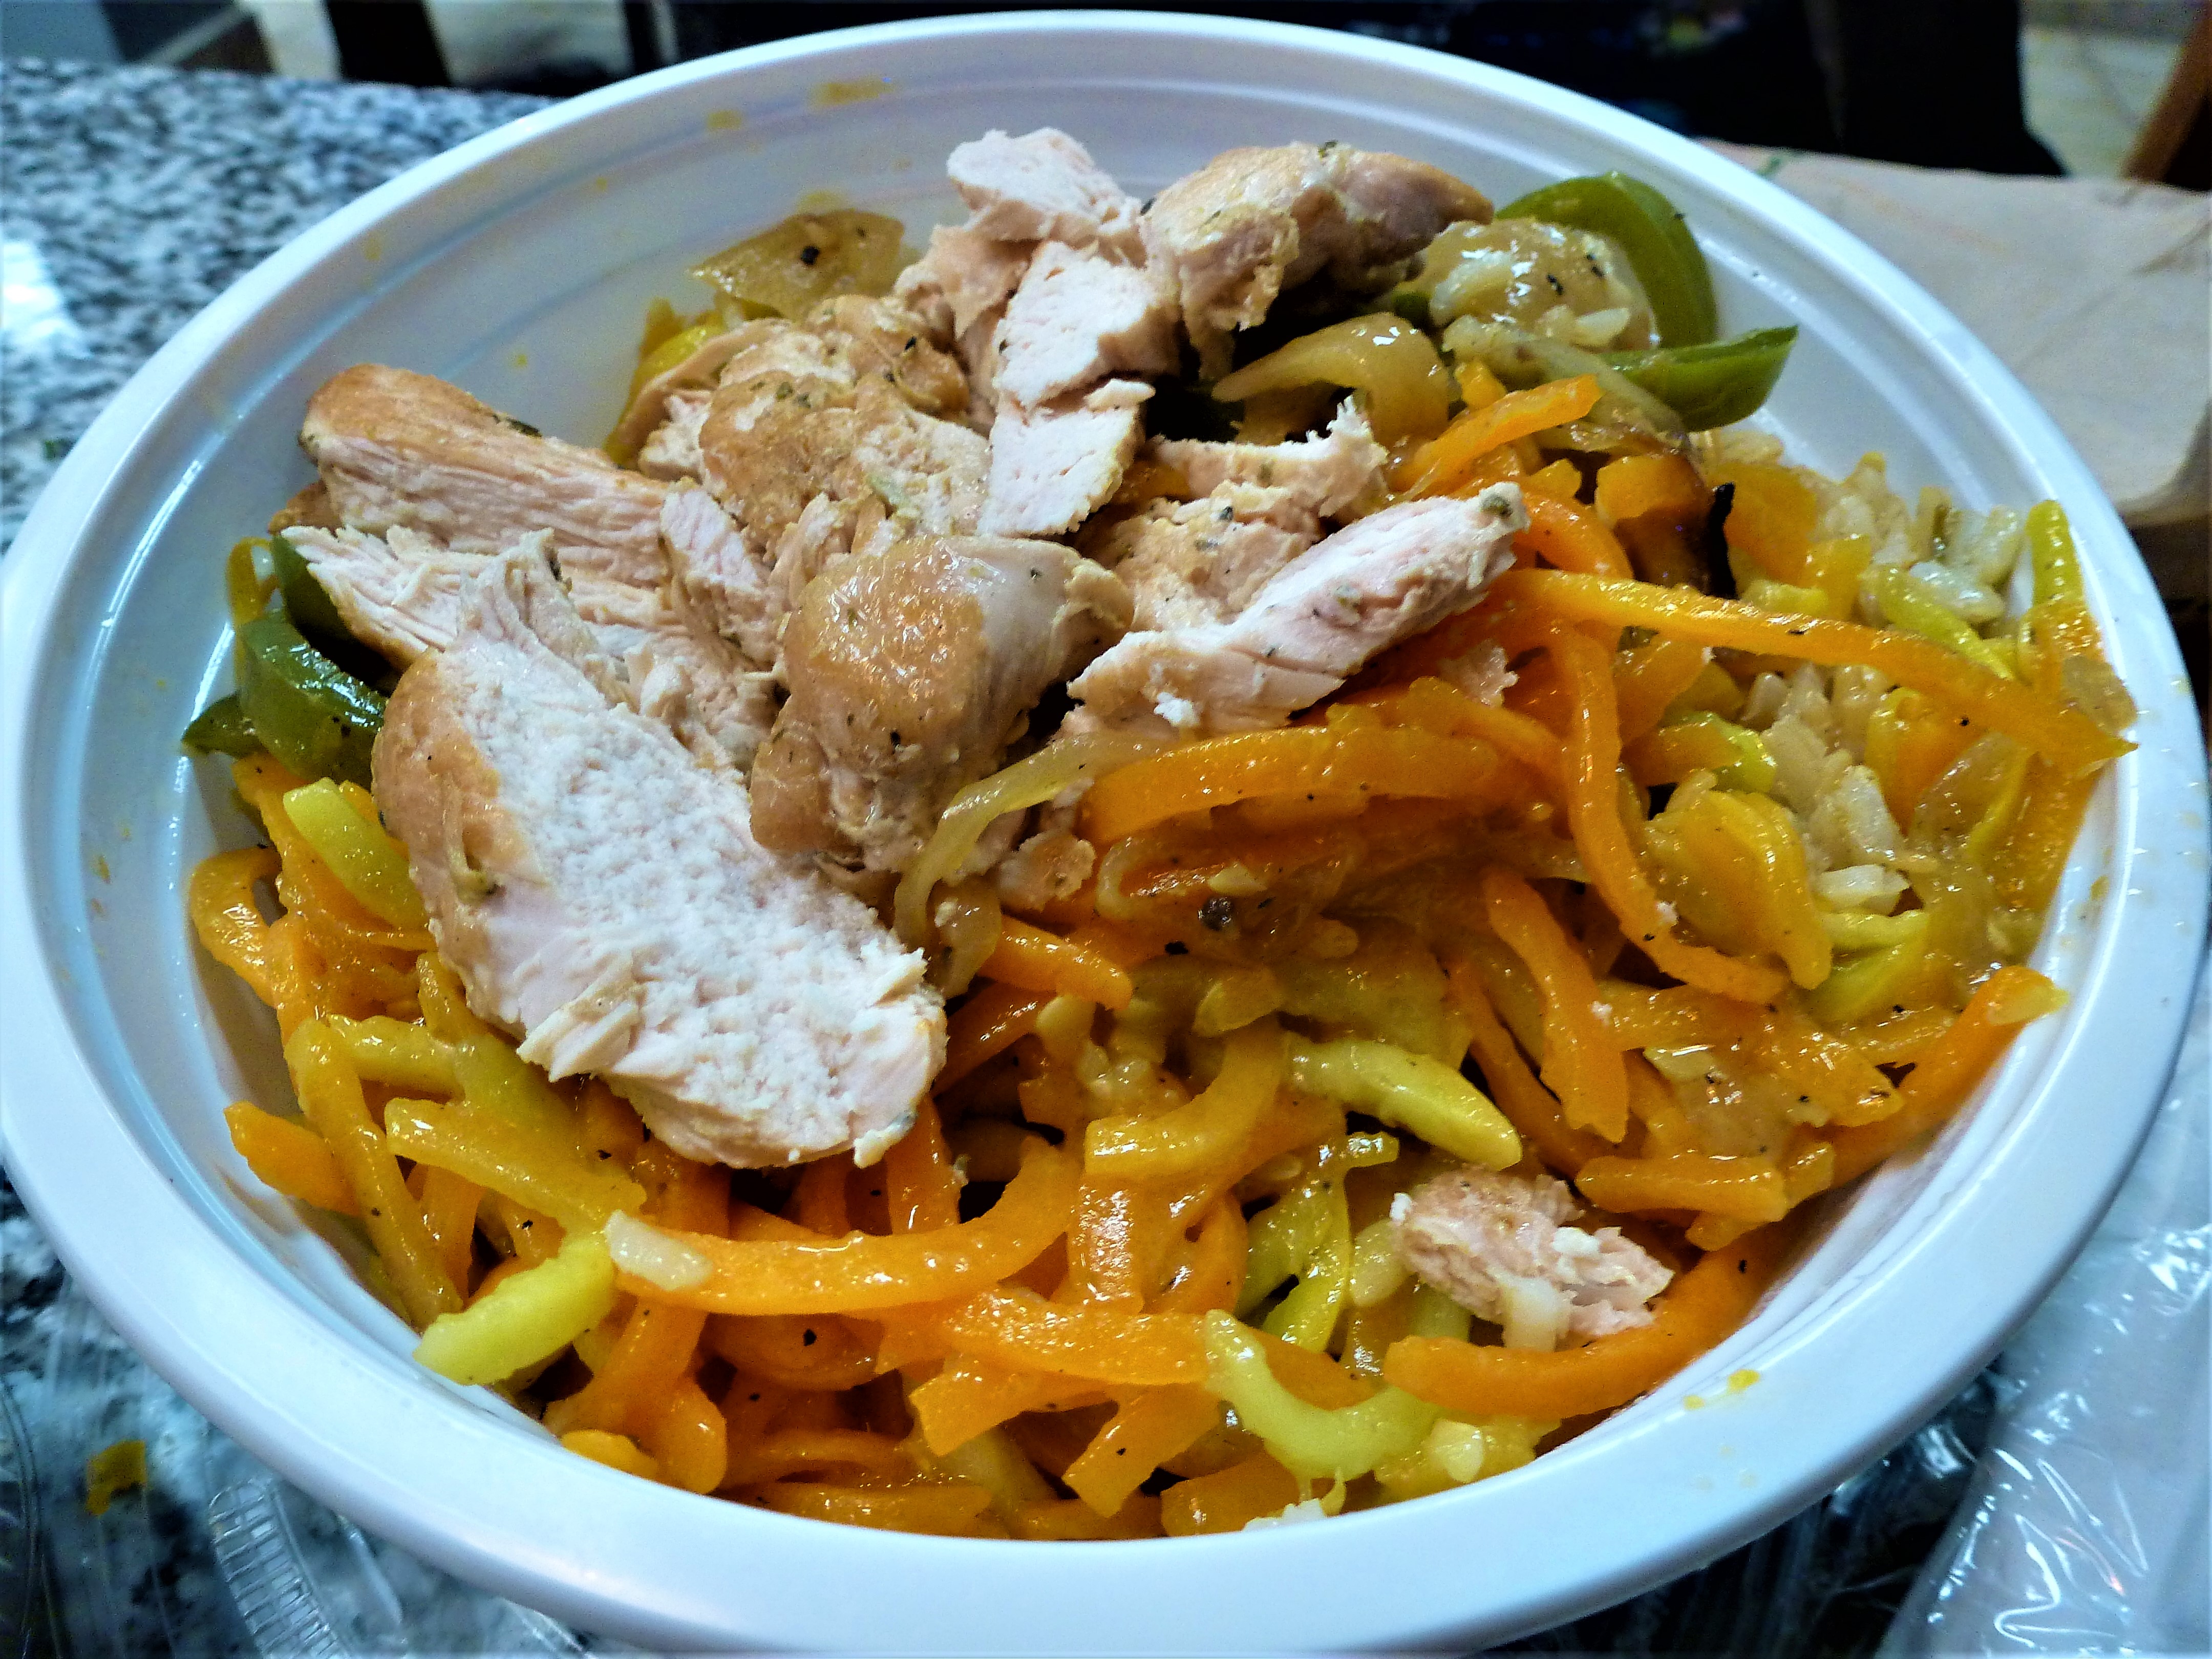 Mixed squash noodles with grilled chicken from CRISP Walpole in Walpole, Mass.